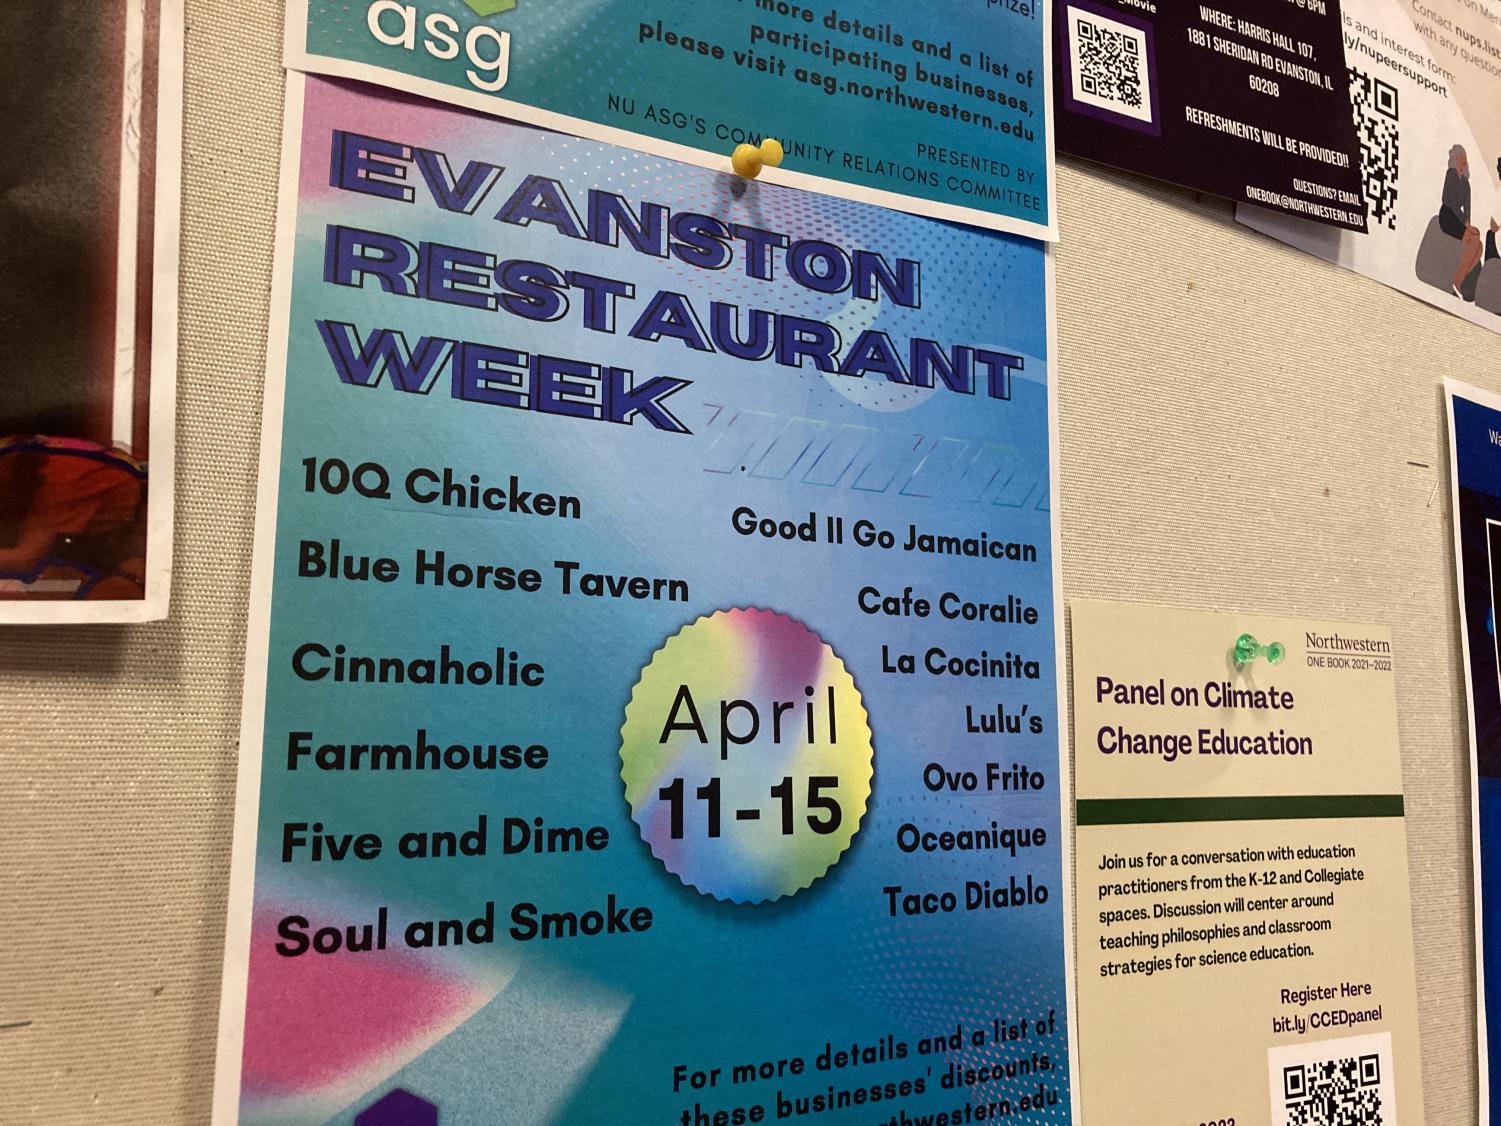 A+teal%2C+blue+and+pink+poster+advertising+Evanston+Restaurant+Week+pinned+on+a+tan+bulletin+board.+It+lists+13+participating+restaurants.